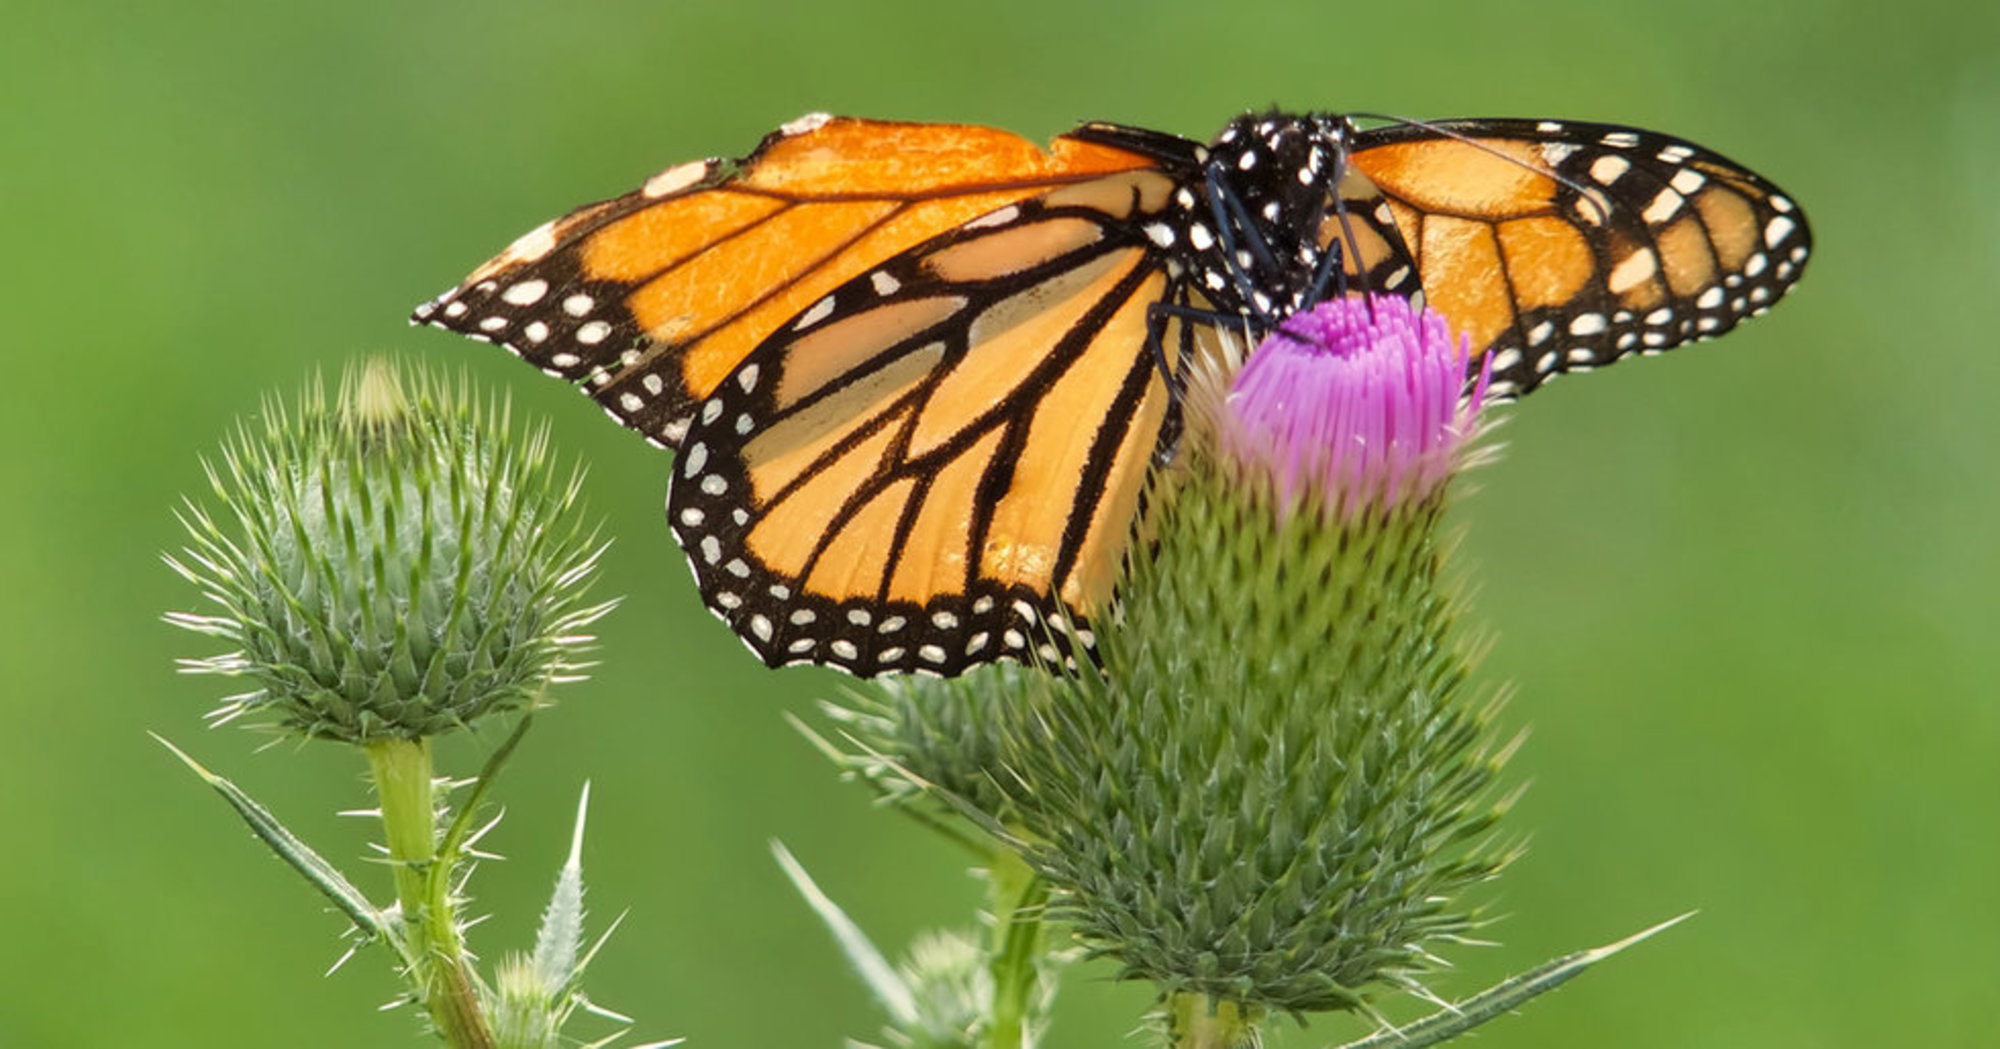 Groundbreaking 'Airbnb for Butterflies' Now Open for Business, Donations